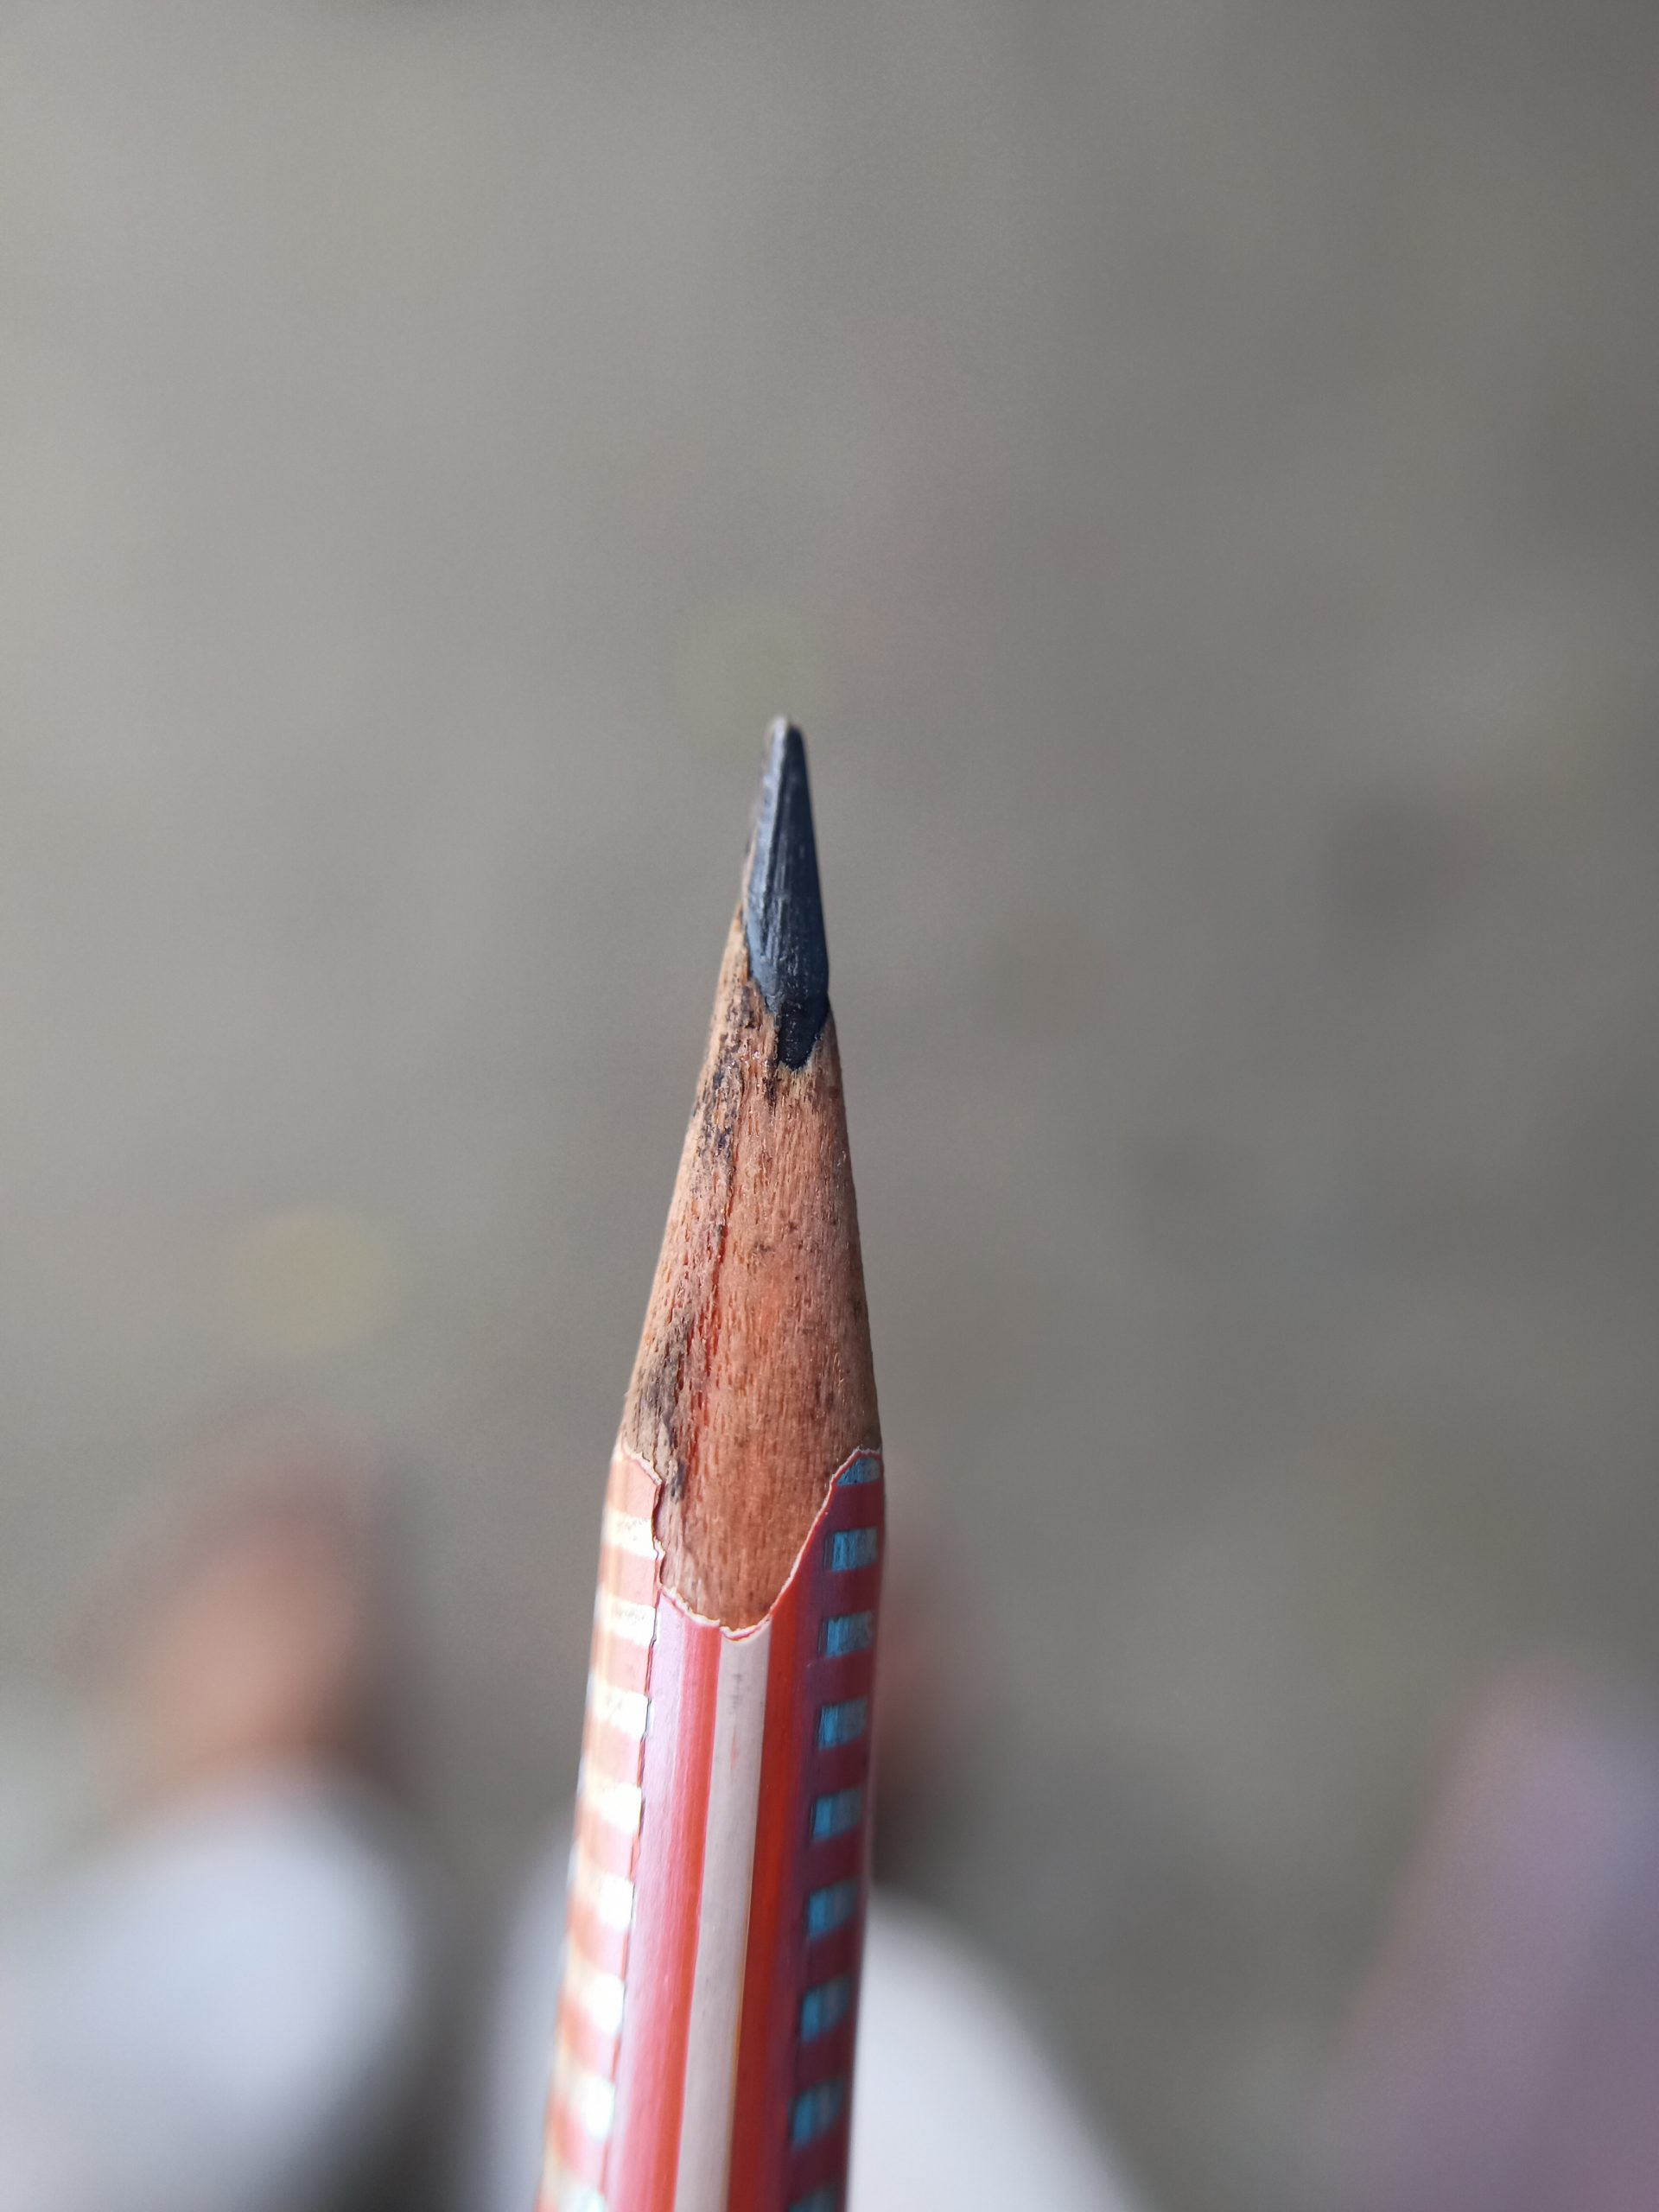 Pointed tip of a pencil